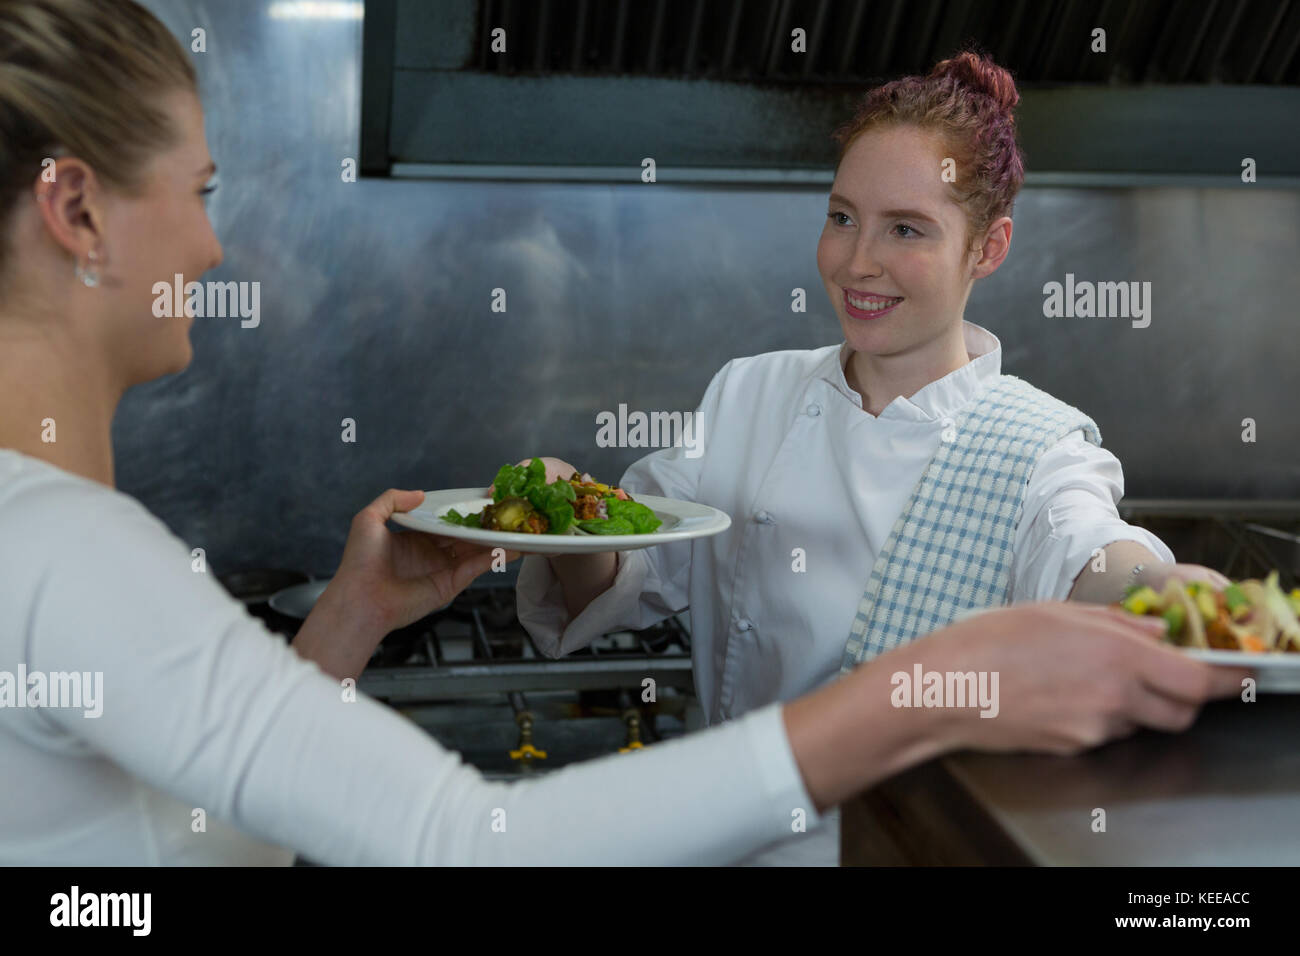 Female chefs holding food plates in the kitchen Stock Photo